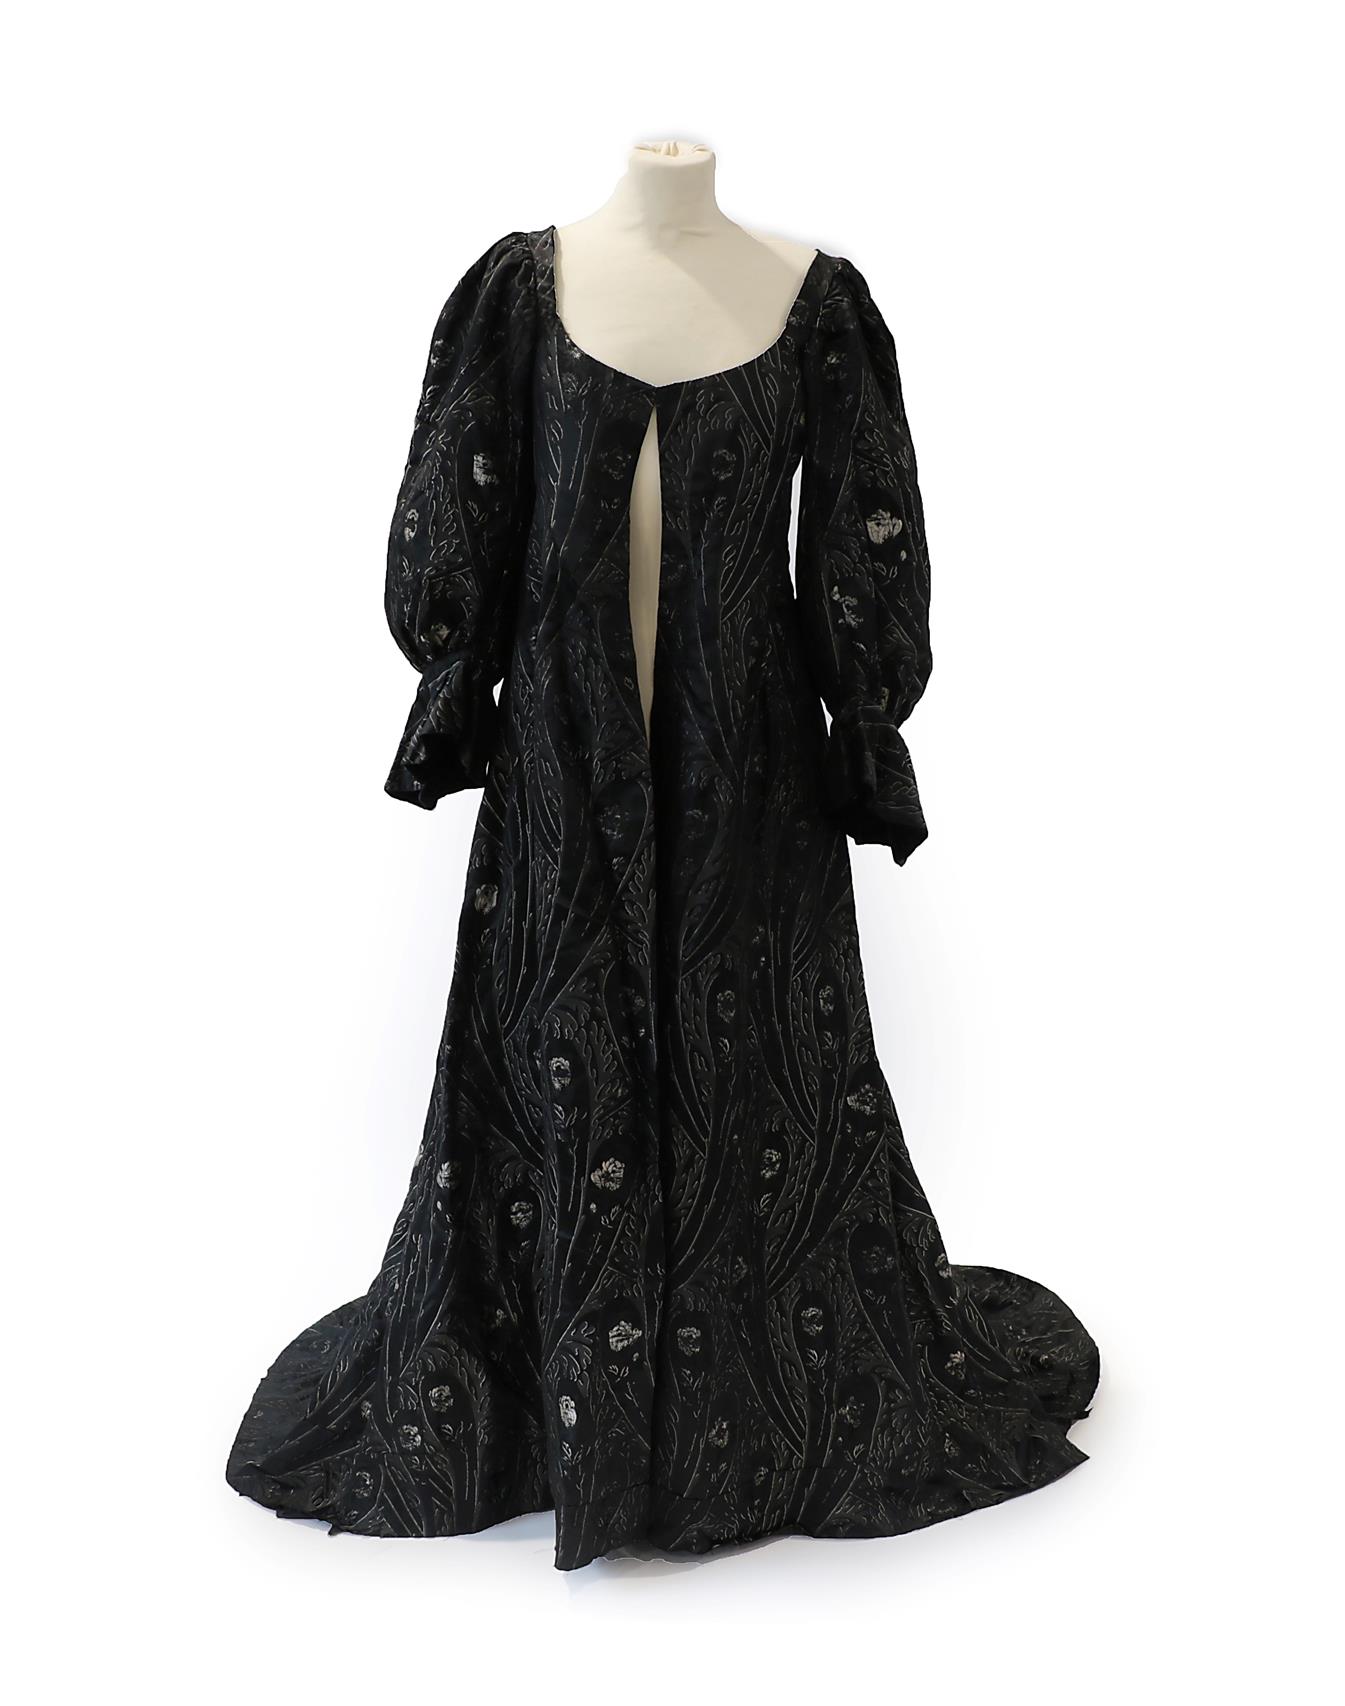 Circa 1870/1880 Aesthetic Movement Black Silk Robe, with gathered sleeve ends terminating with